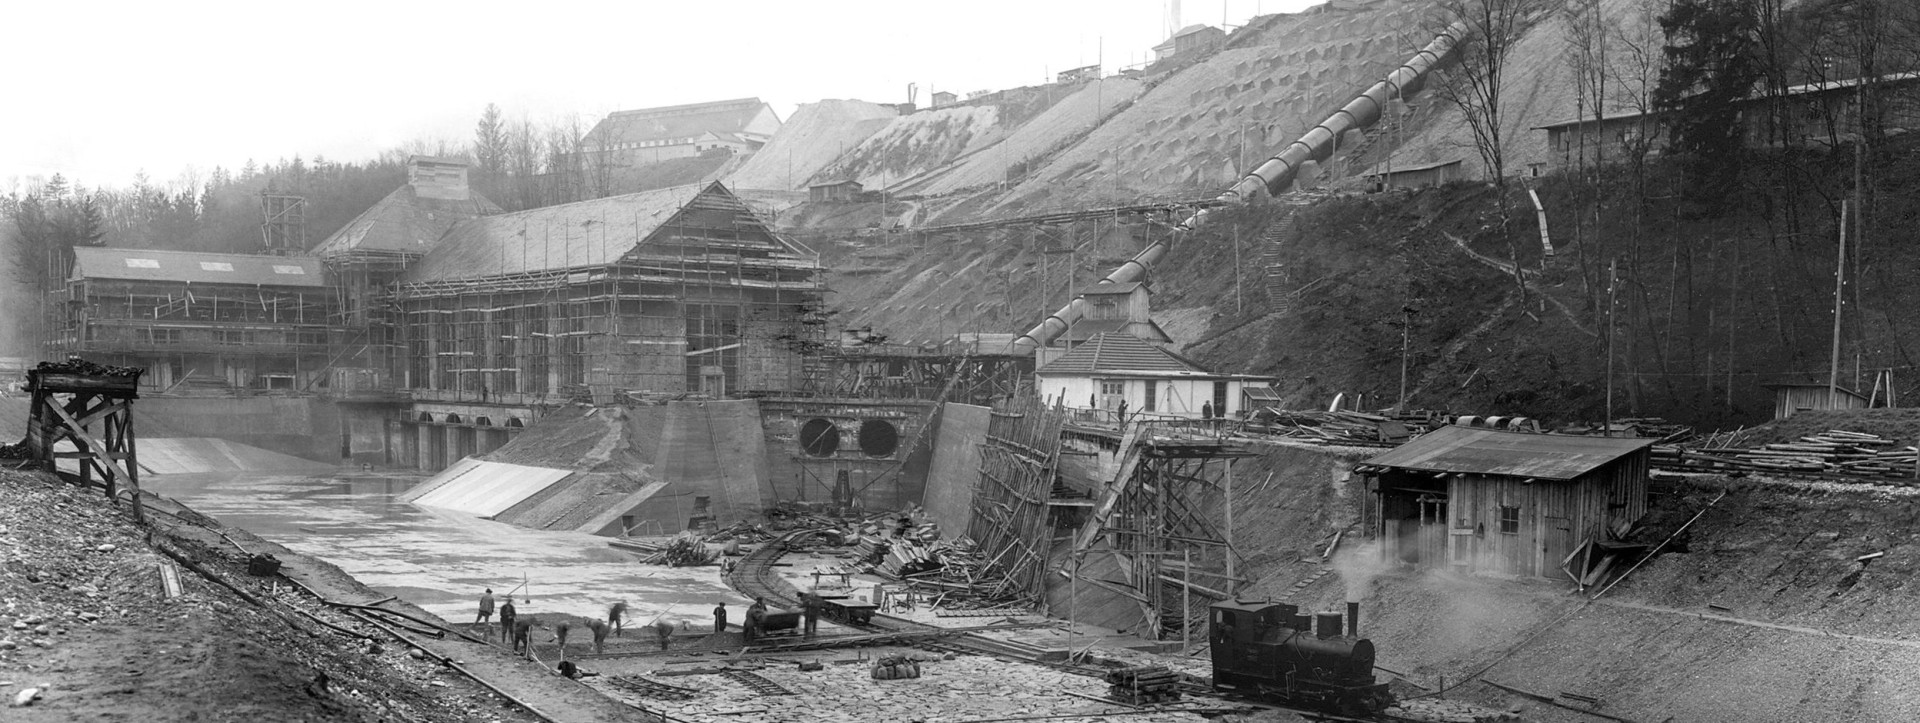 Construction of the Alzwerke hydroelectric facility in Burghausen: Alexander Wacker’s vision of chemical production with hydro-electric power was implemented in his own plants.